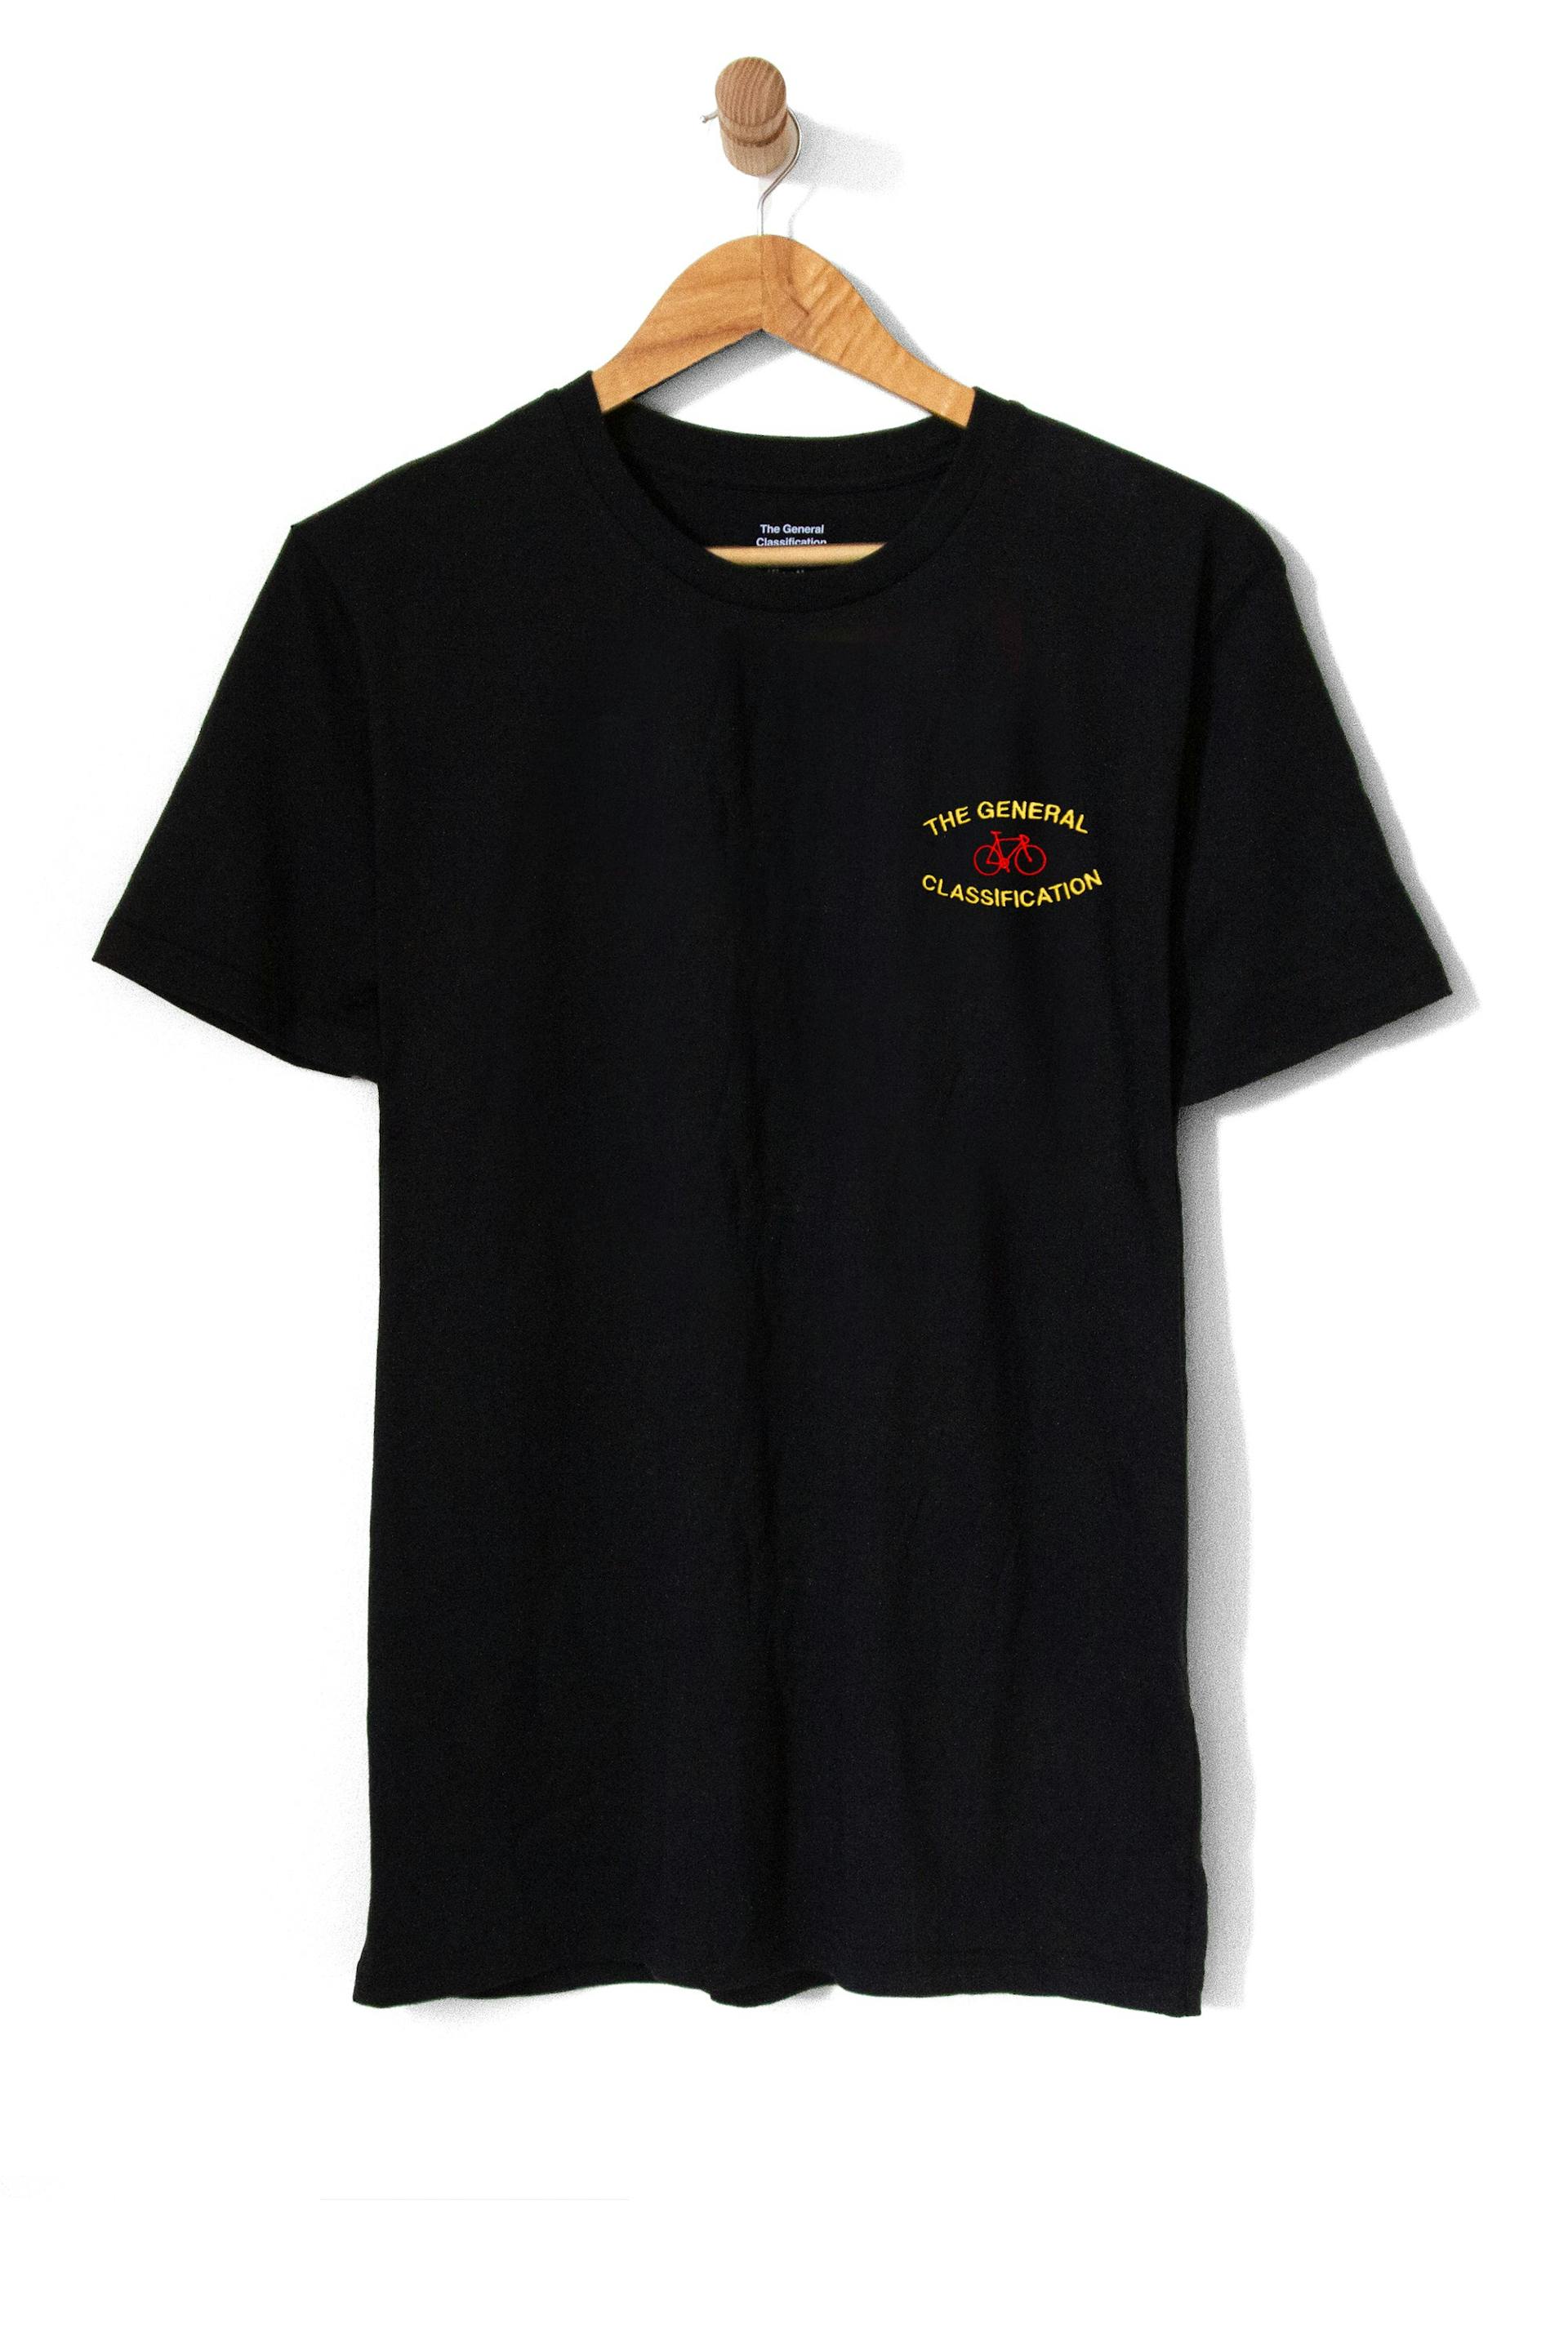 Stitched Median Bicycle Tee Black